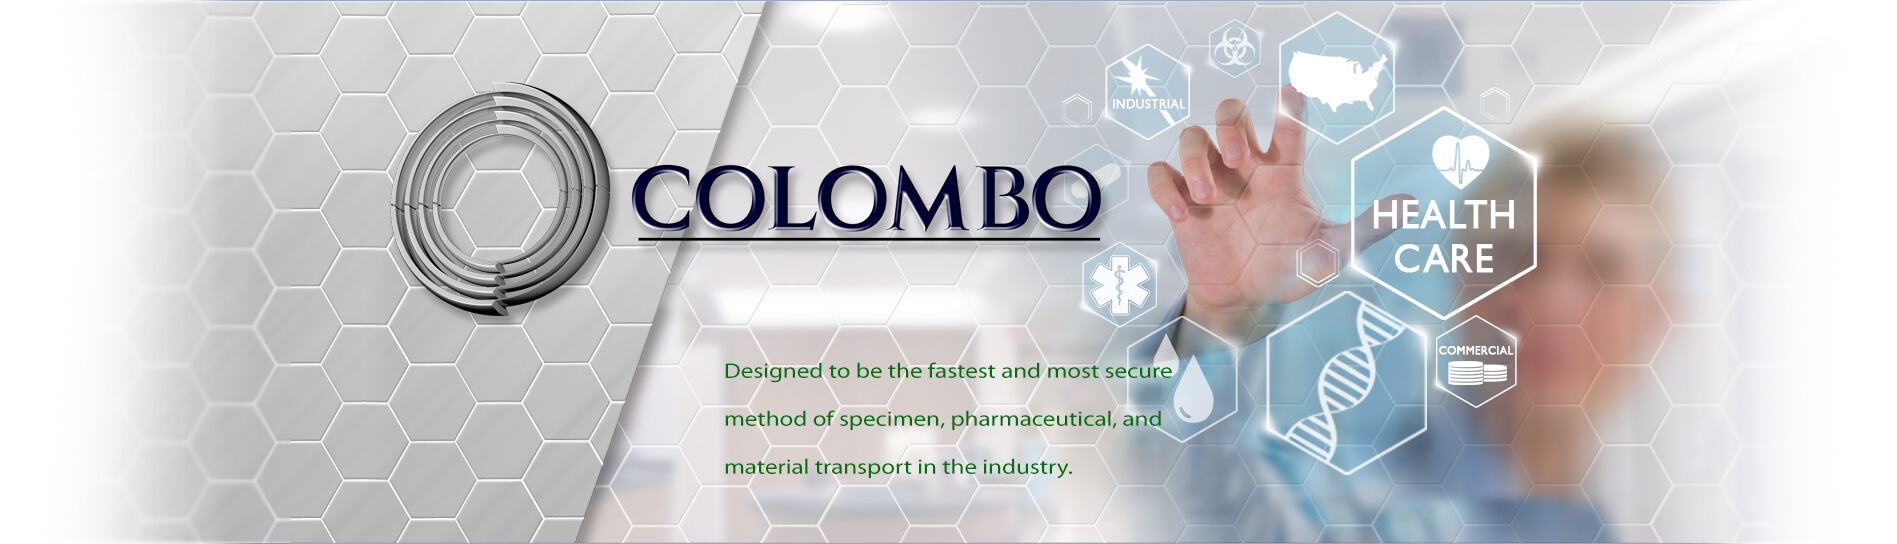 Colombo Pneumatic Tube Systems - designed to be the fastest and most secure method of specimen, pharmaceutical, and material transport in the industry.